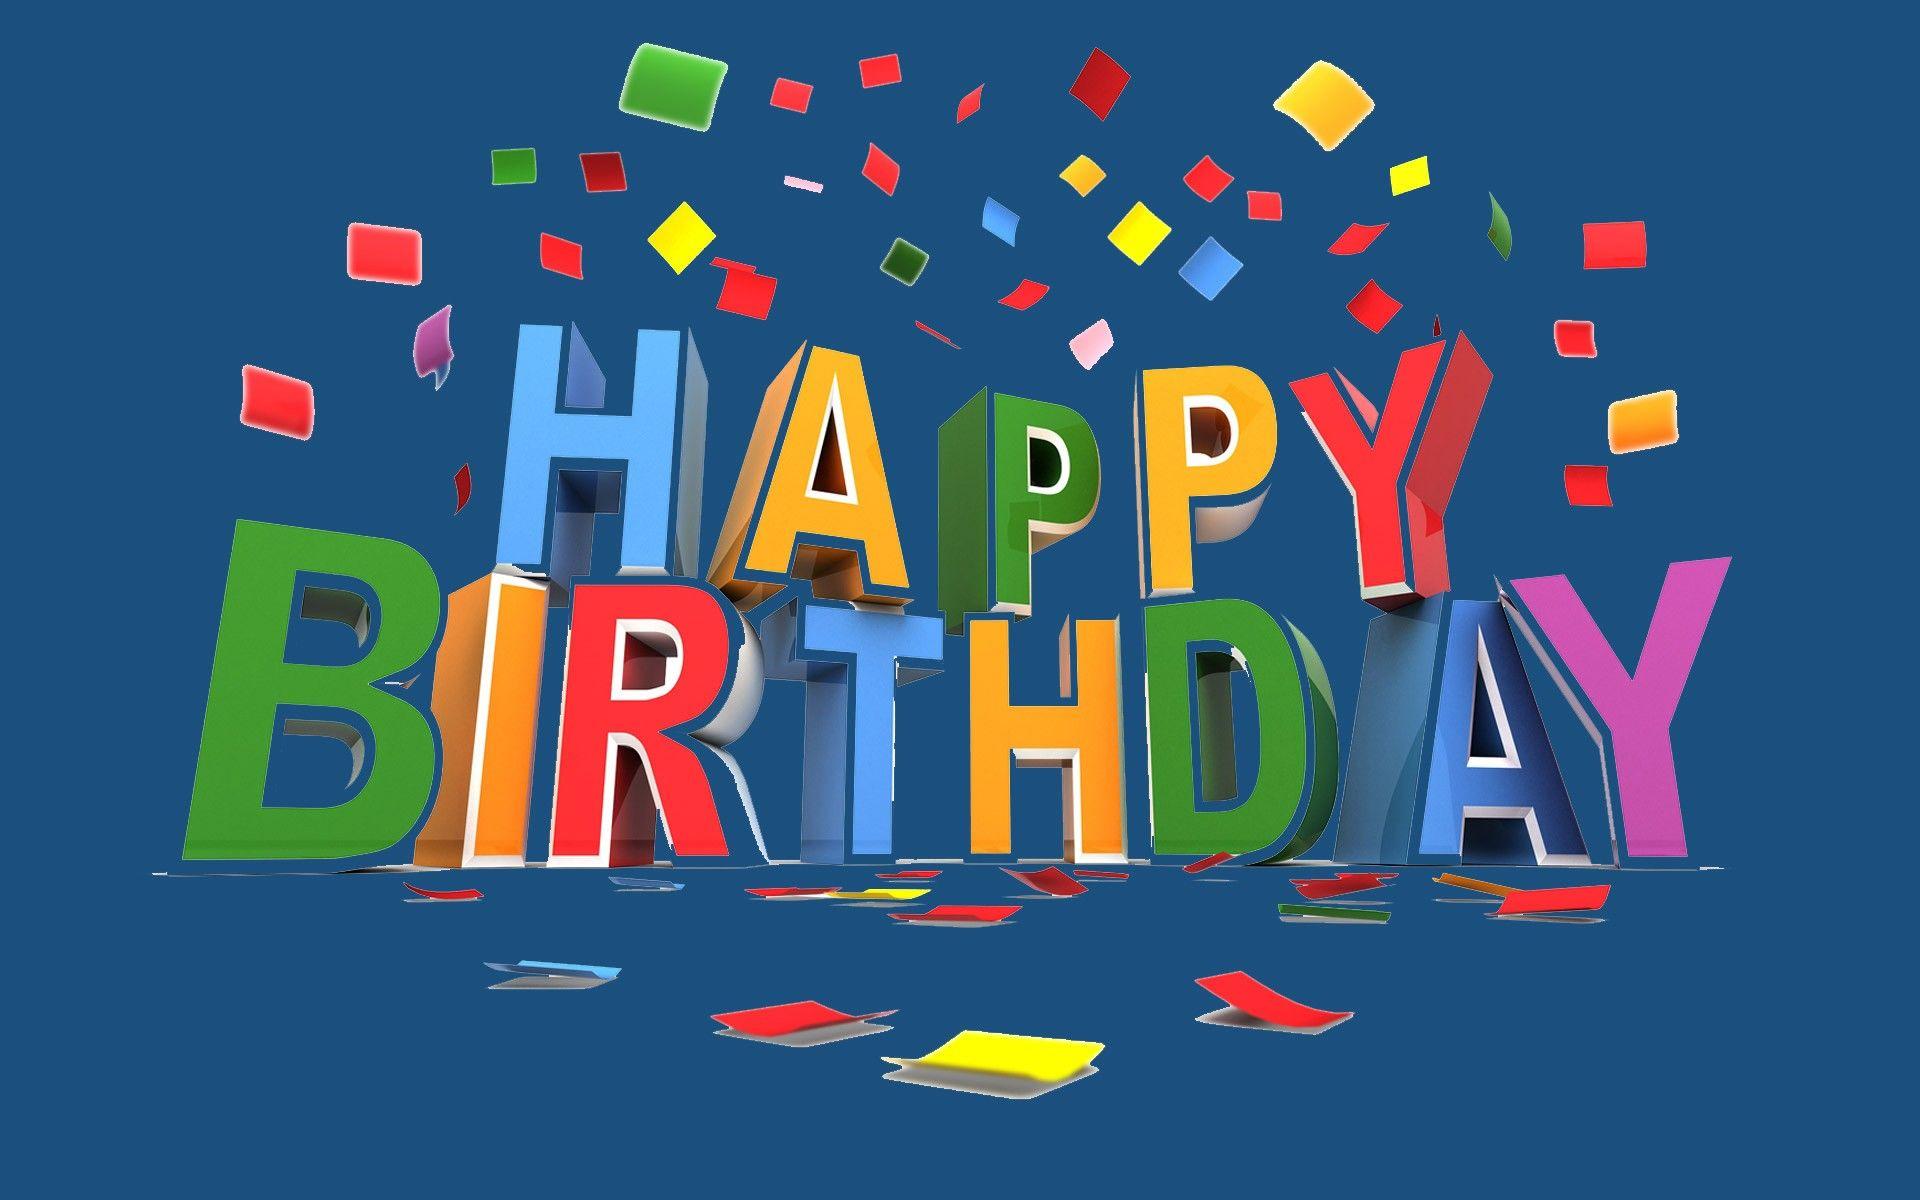 FHDQ PC Happy Birthday Image: Wallpaper and Picture for PC & Mac